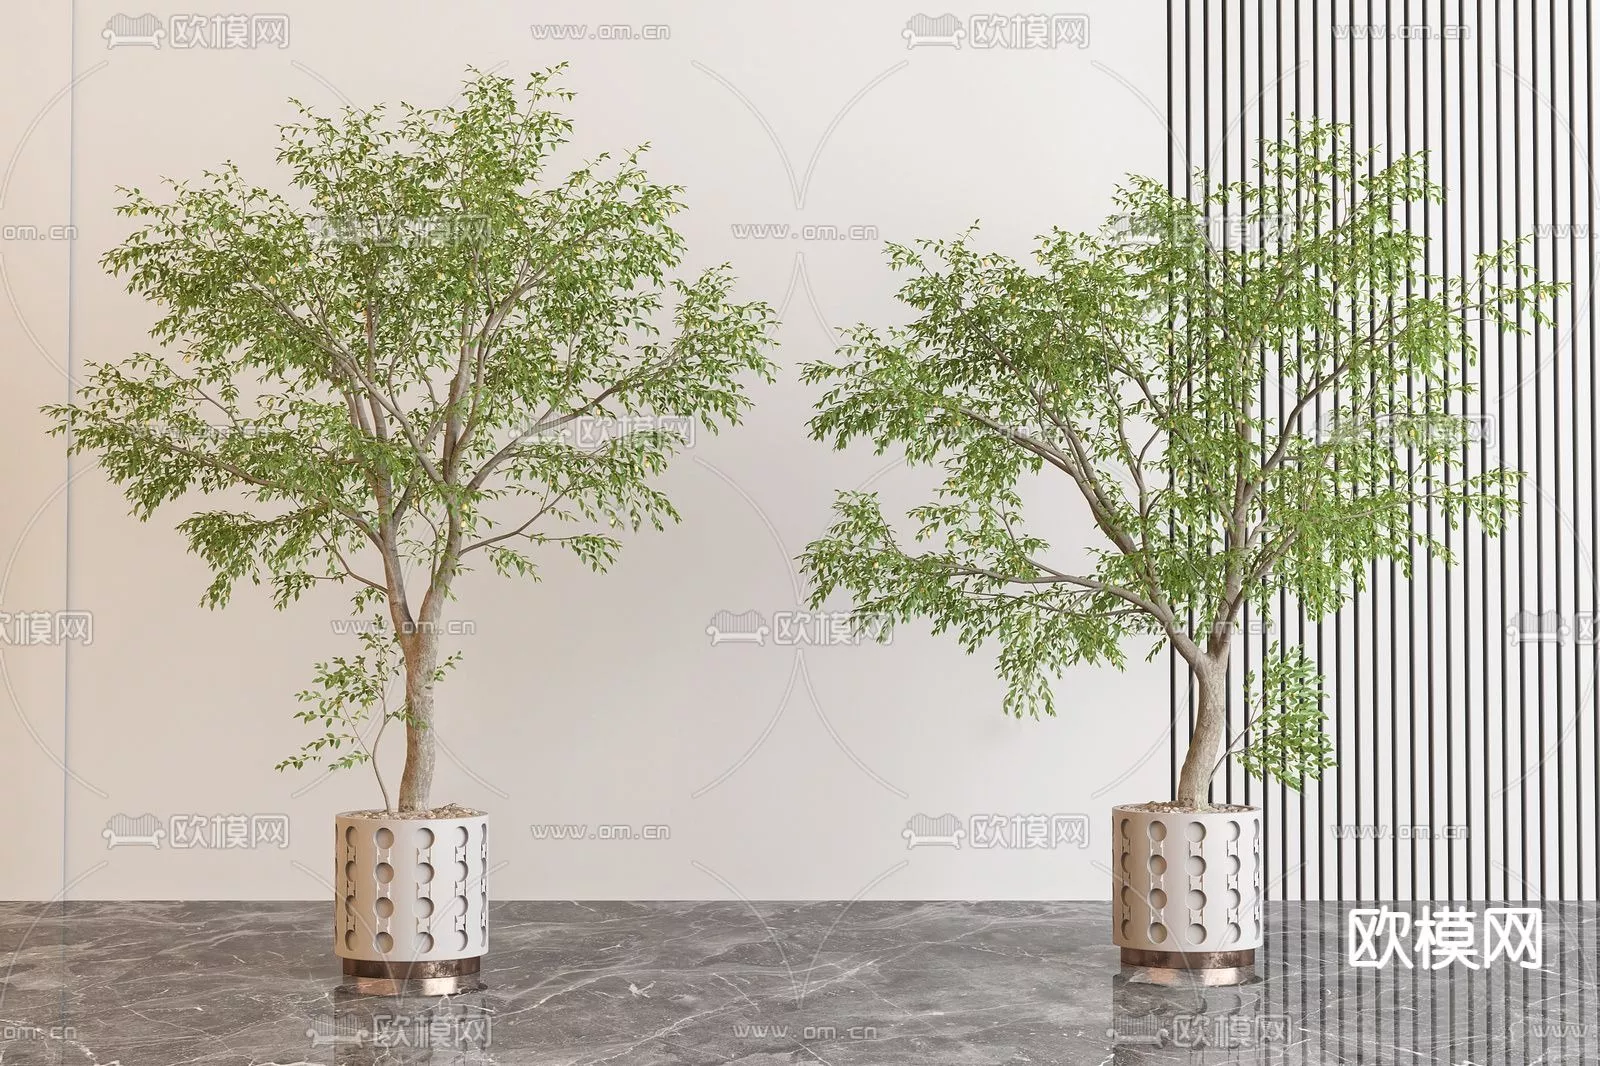 MODERN TREE - SKETCHUP 3D MODEL - VRAY OR ENSCAPE - ID15437